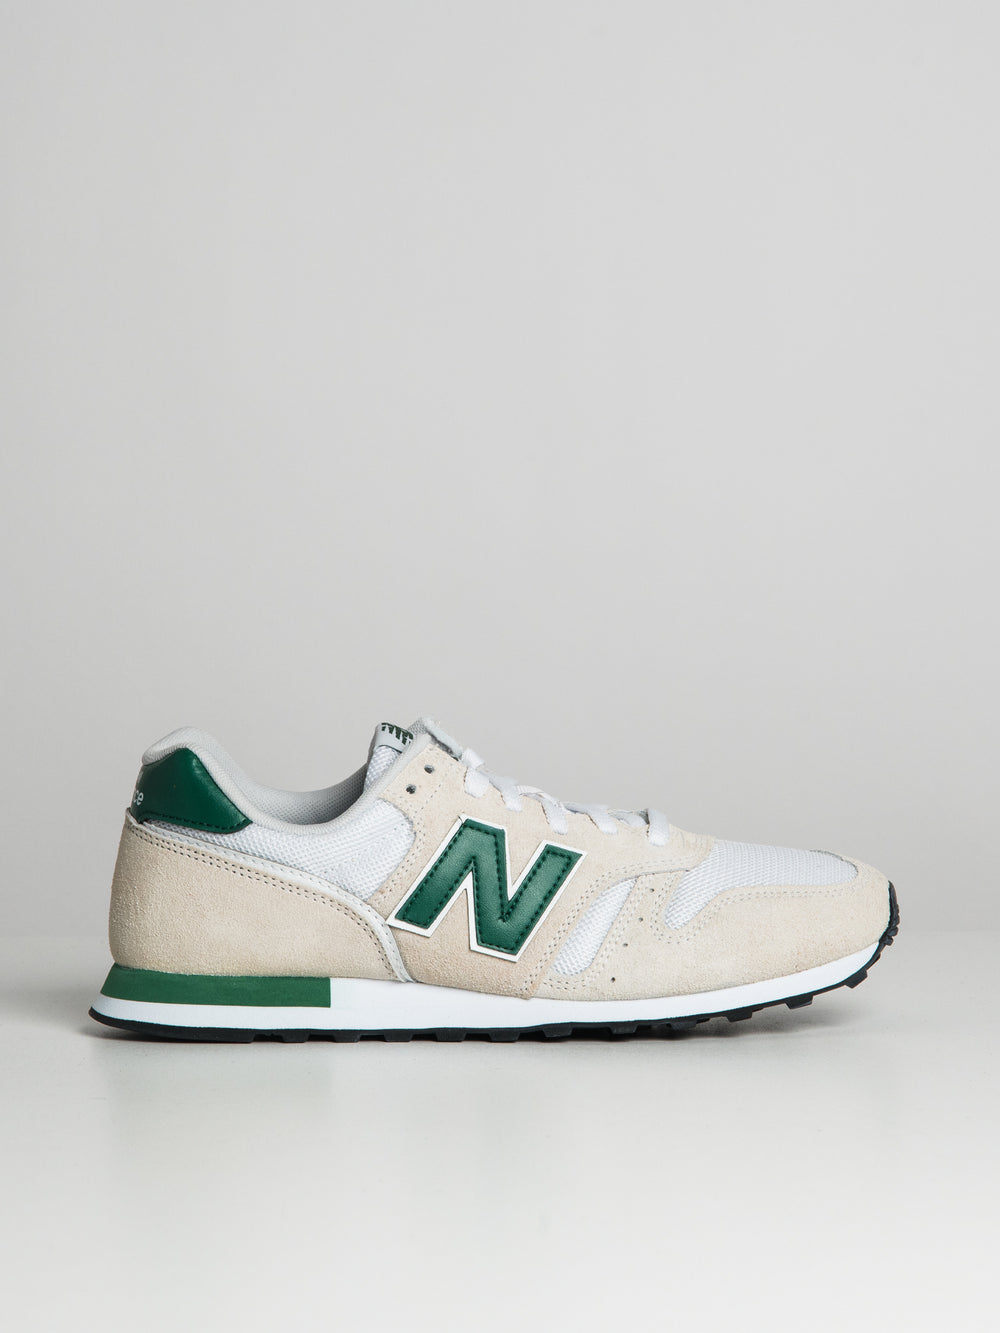 MENS NEW BALANCE THE 373 - CLEARANCE